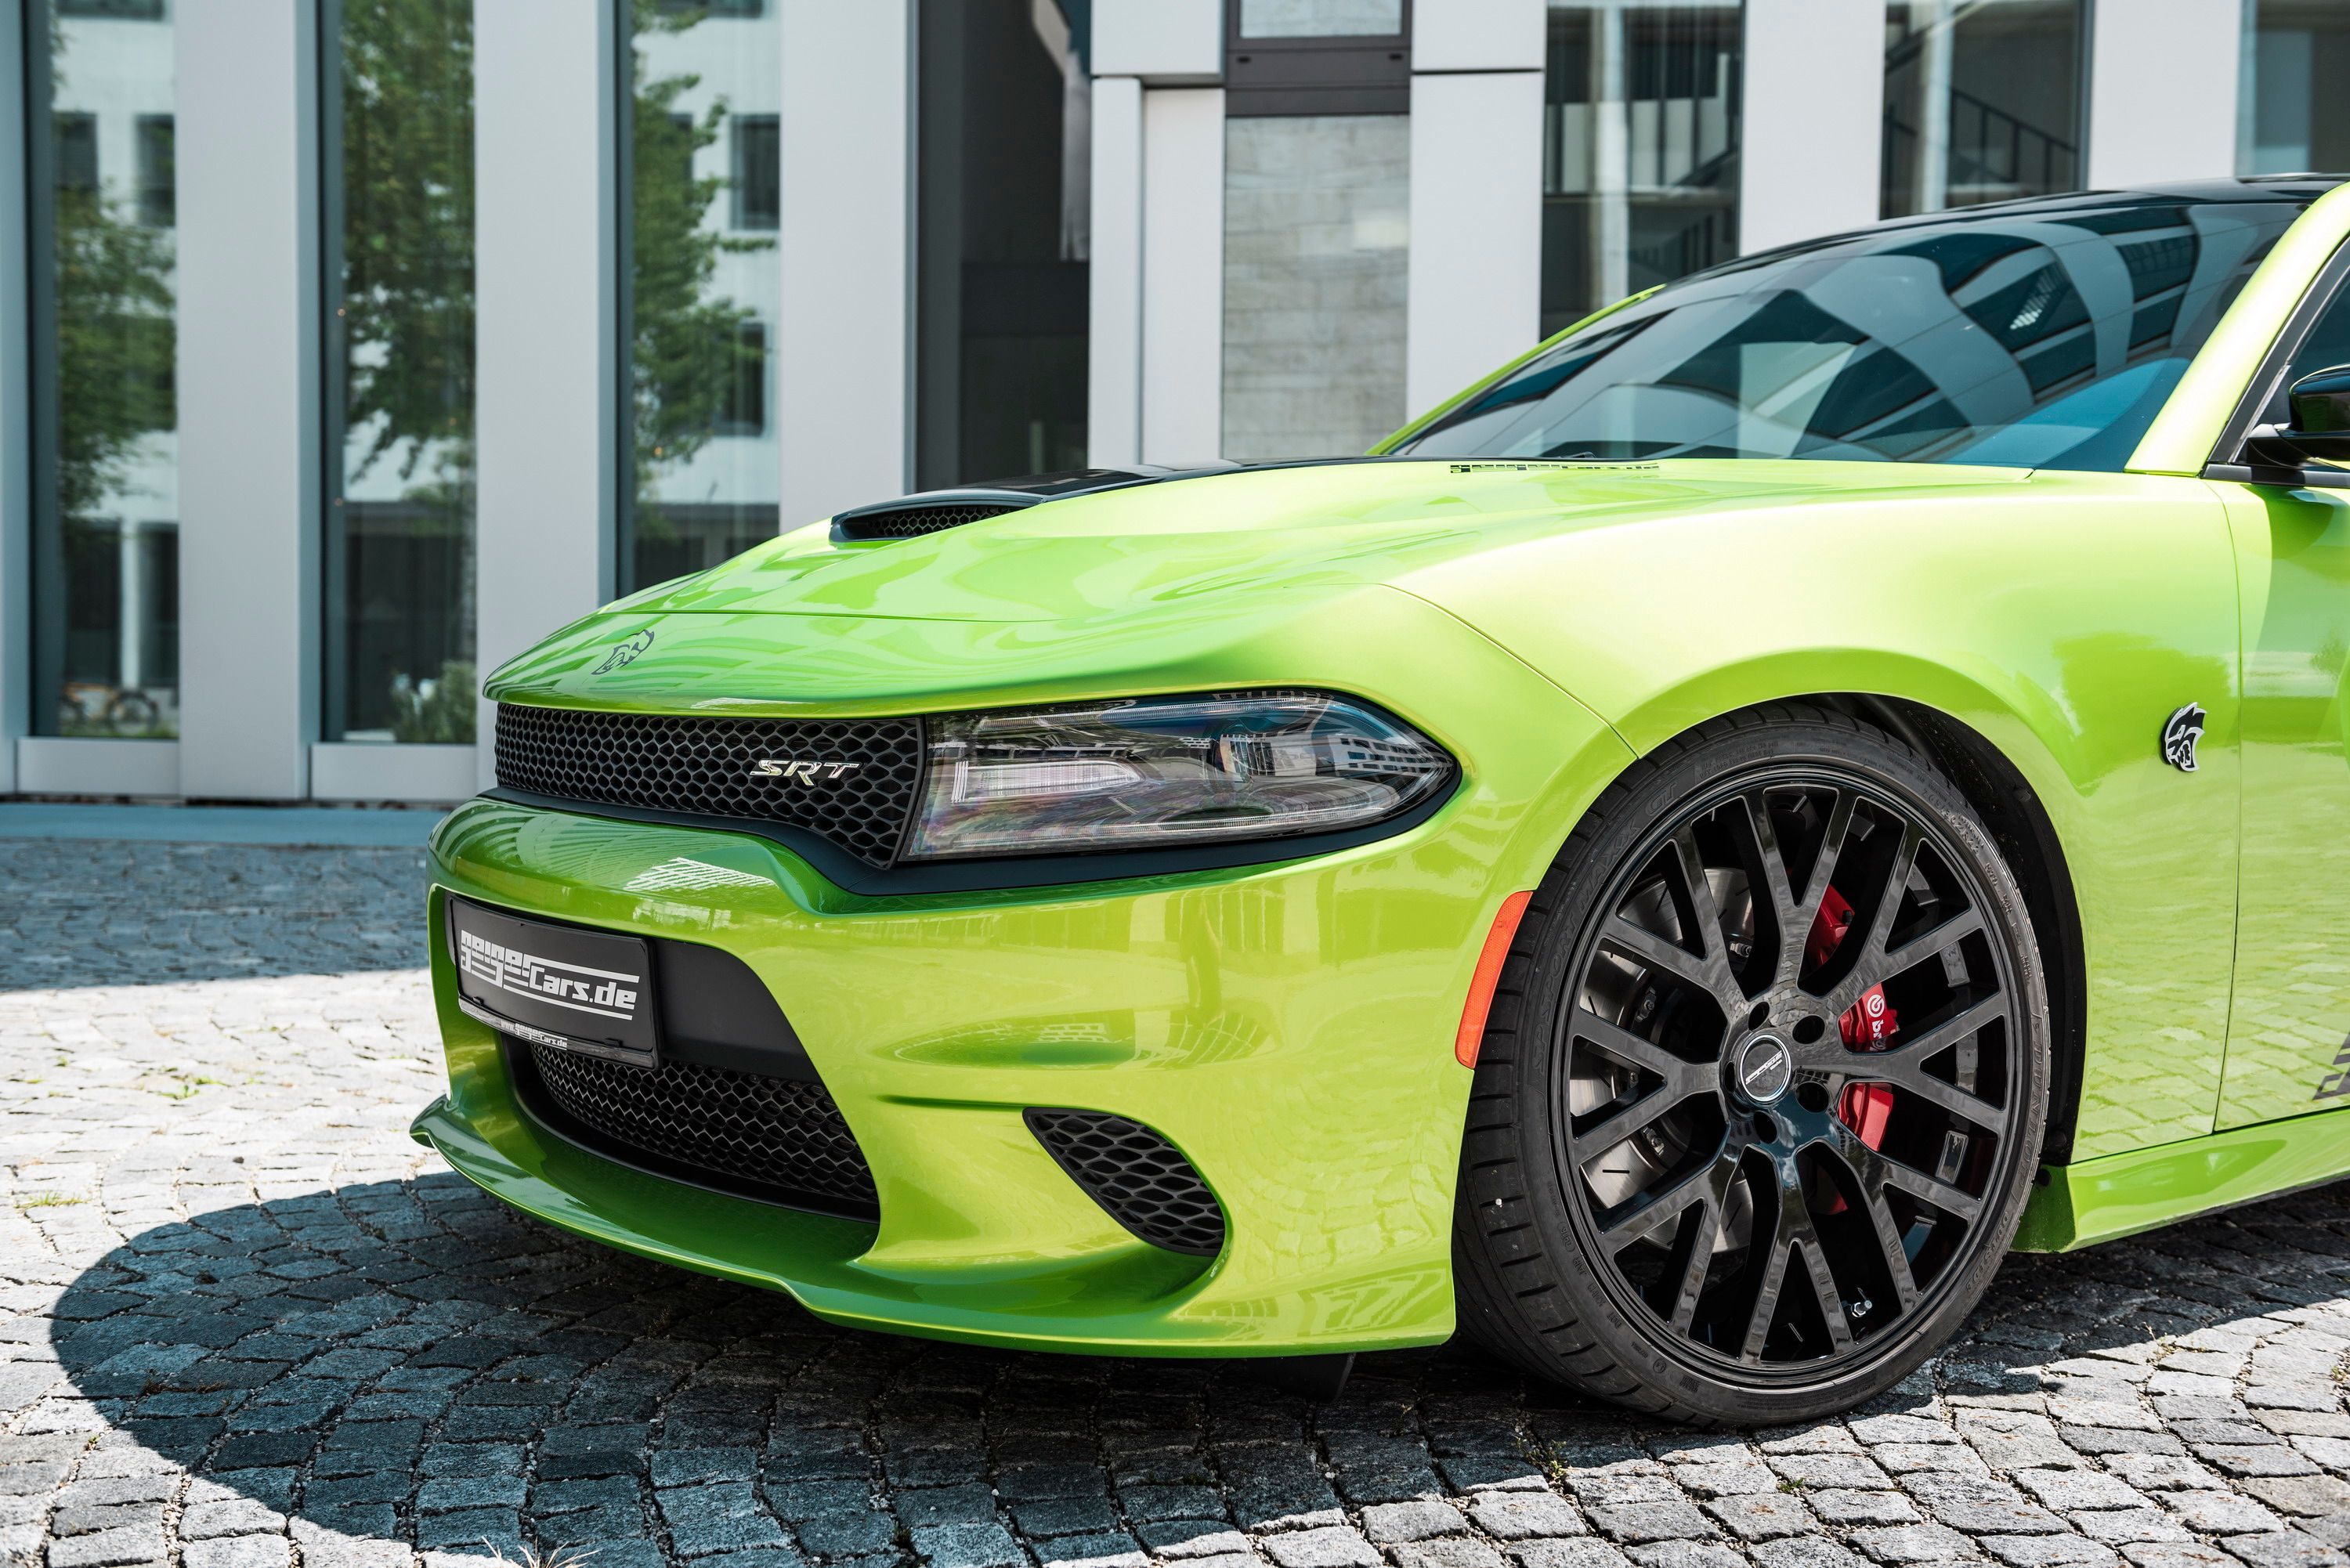 2016 Dodge Charger SRT Hellcat by Geiger Cars